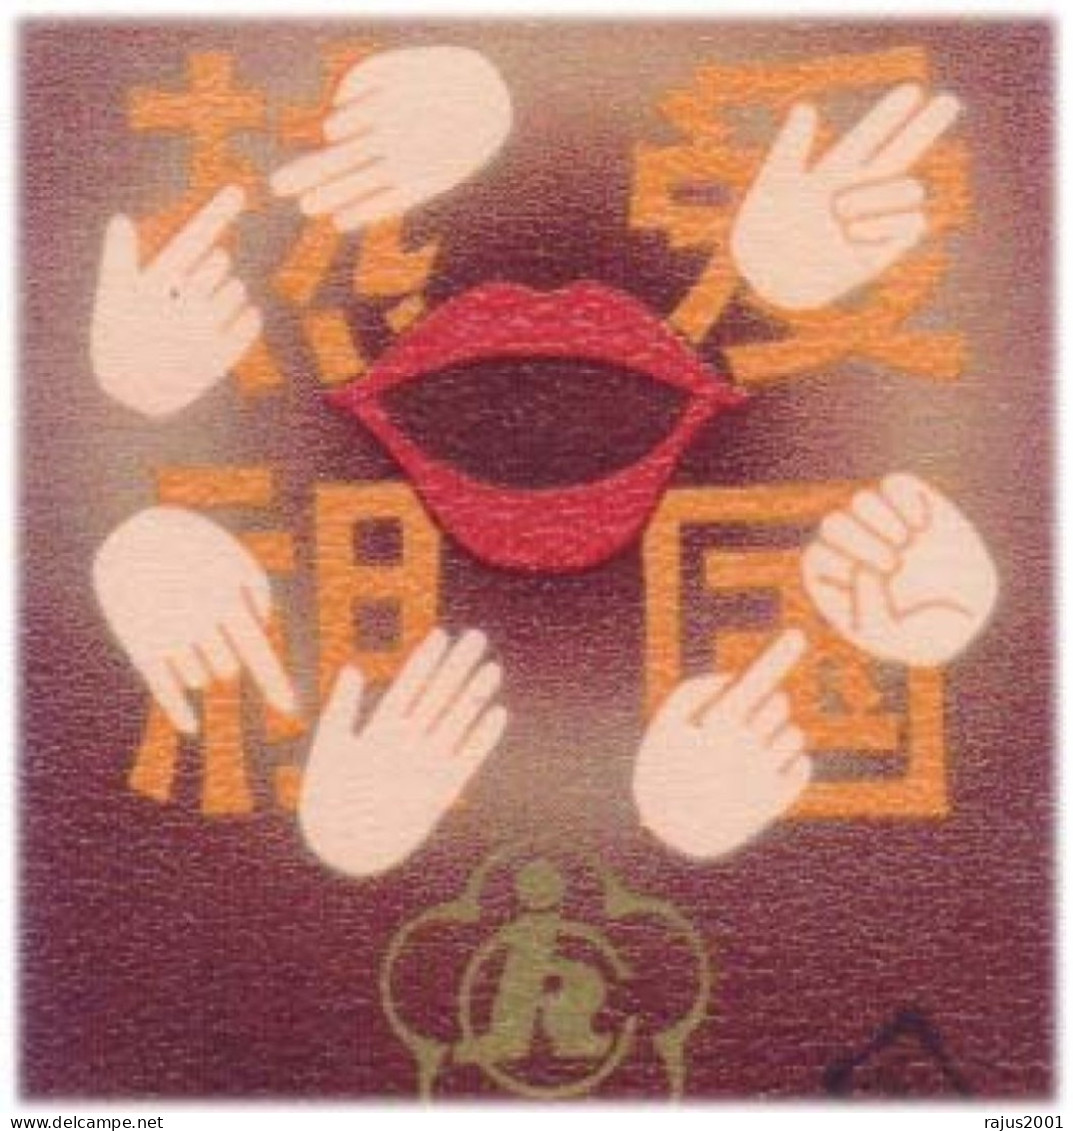 Chinese Handicapped Persons, Disabled Handicaps, Reading Braille, Wheelchair, Deaf Sign Language, Health, Medical FDC - Handicap